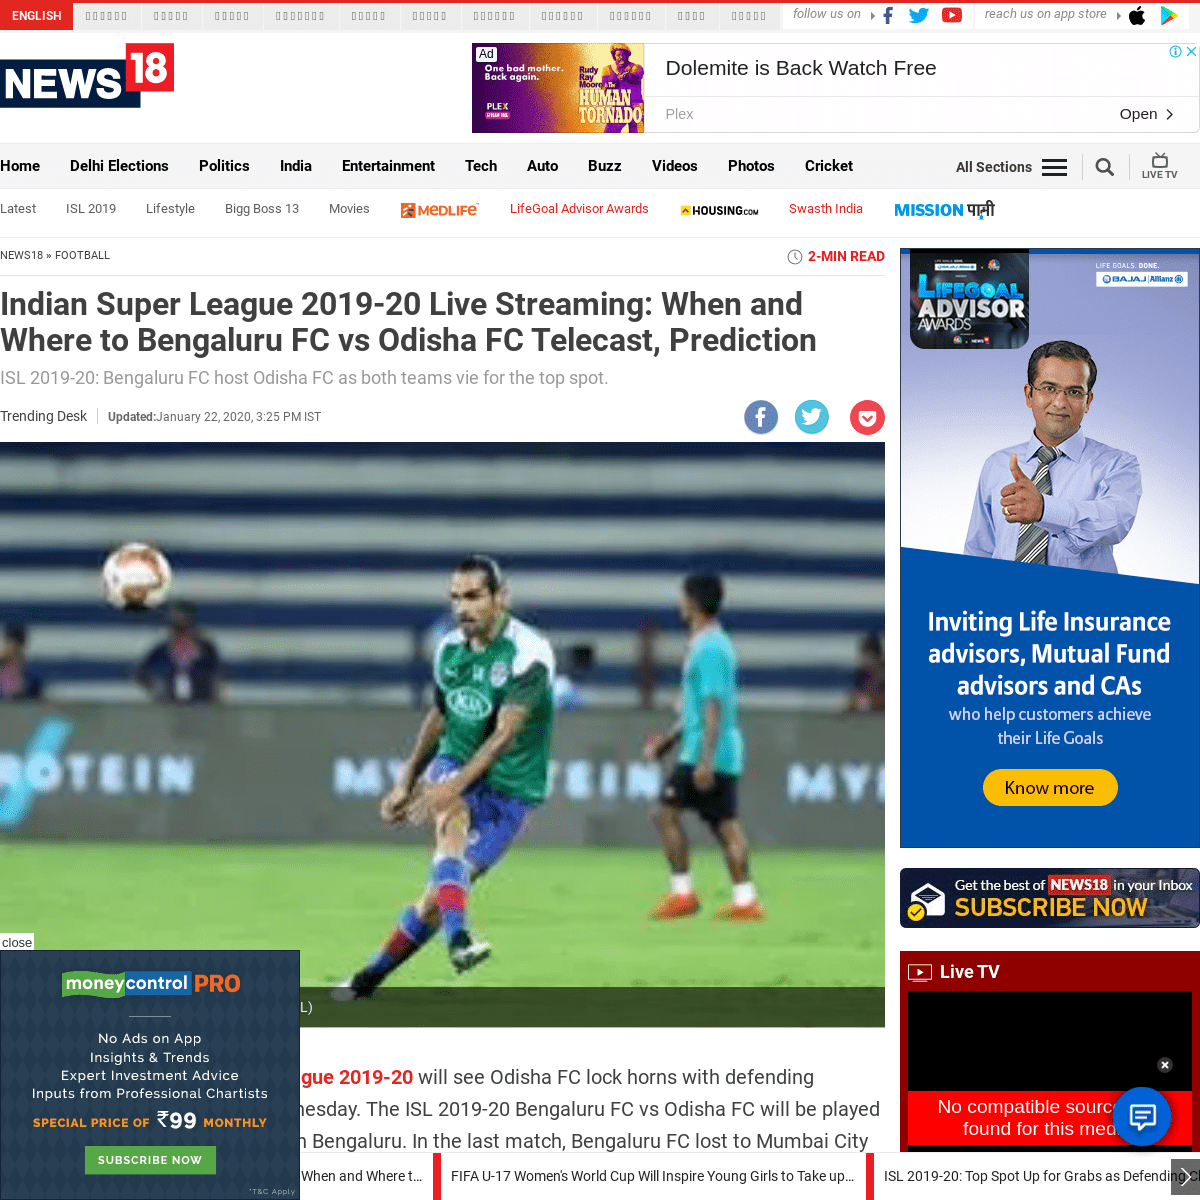 A complete backup of www.news18.com/news/football/indian-super-league-2019-20-live-streaming-when-and-where-to-bengaluru-fc-vs-o